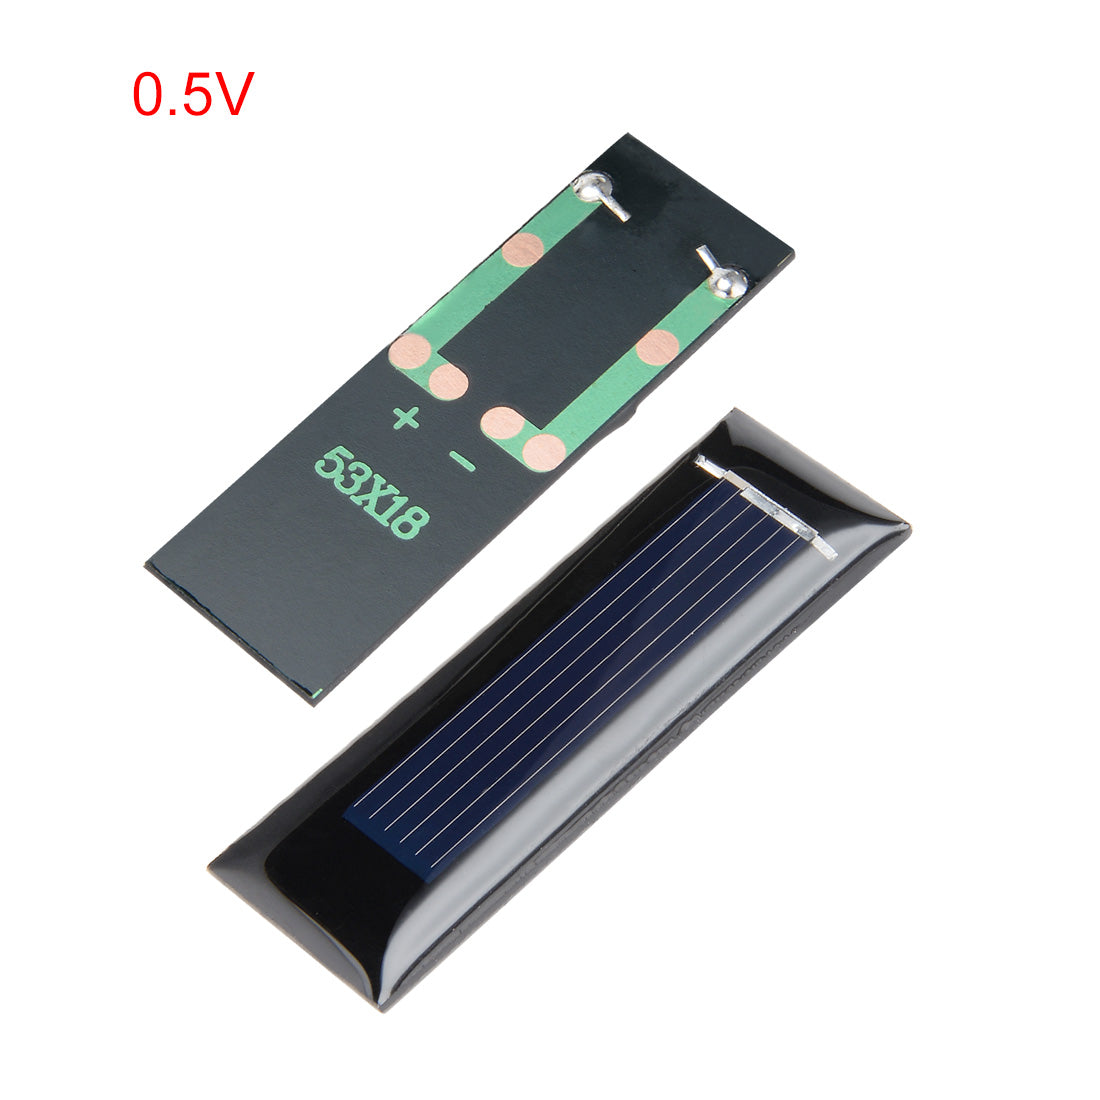 uxcell Uxcell 5Pcs 0.5V 100mA Poly Mini Solar Cell Panel Module DIY for Phone Light Toys Charger 53mm x 18mm